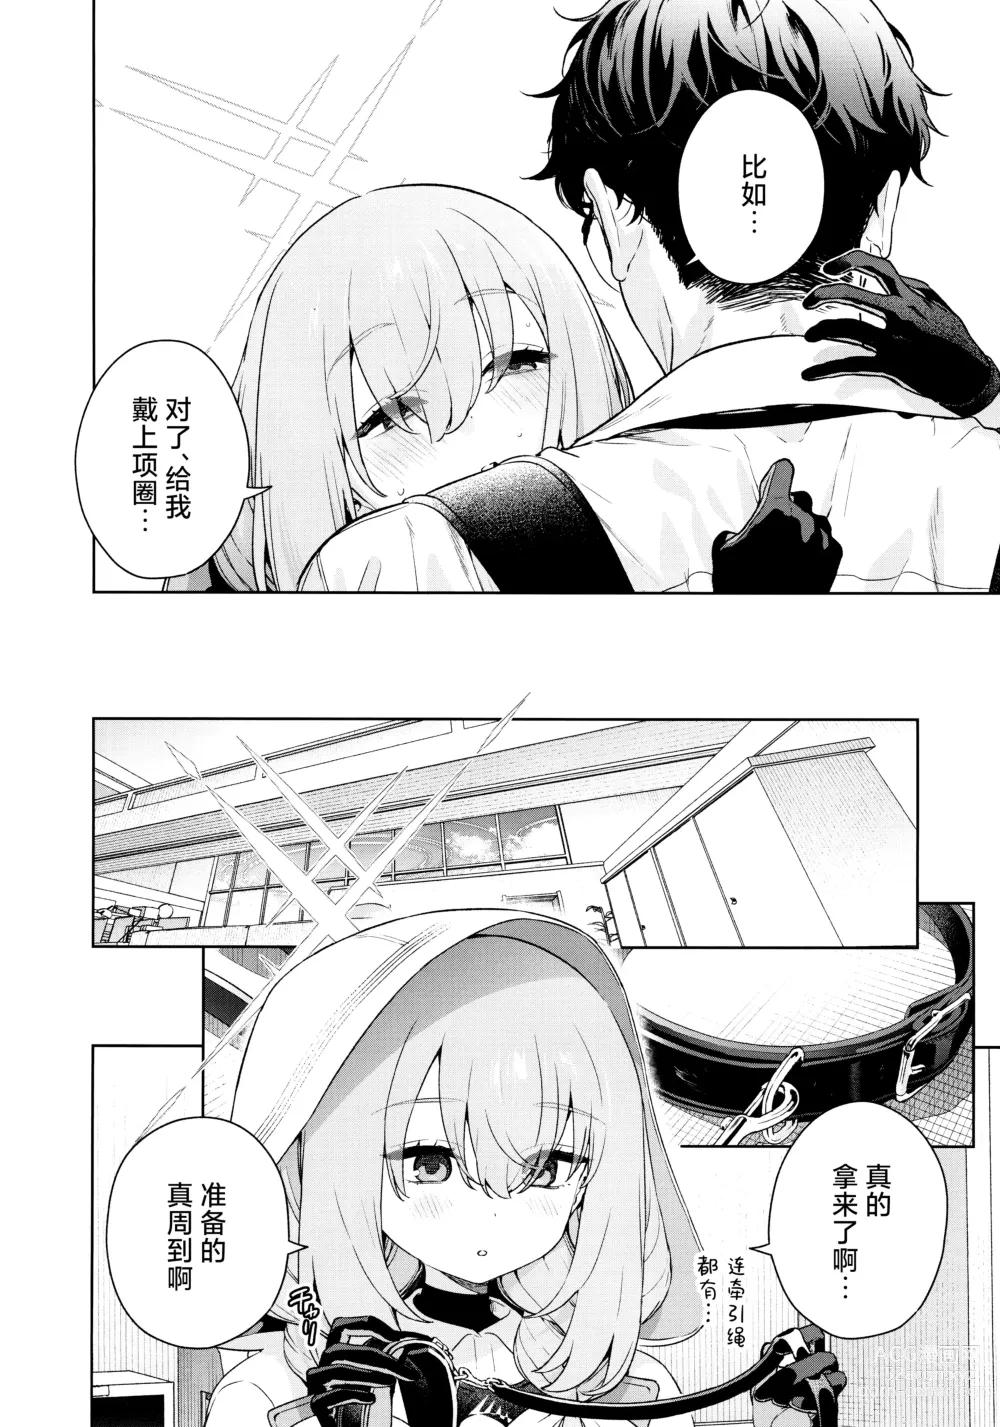 Page 10 of doujinshi 请教(管)教我